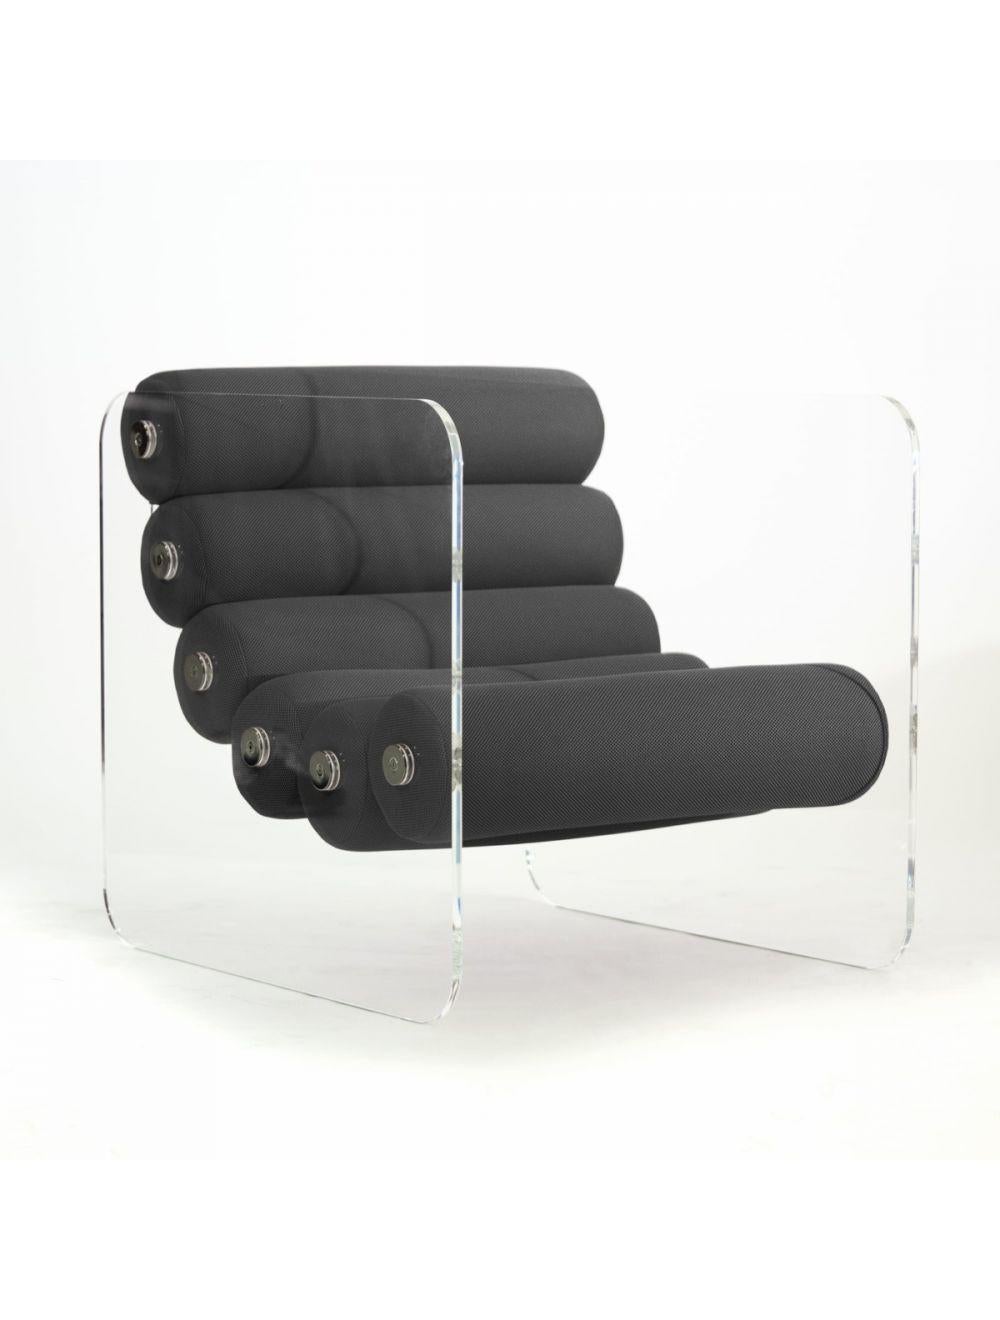 Contemporary Mw02 design armchair, handmade in France by designer Olivier Santini For Sale